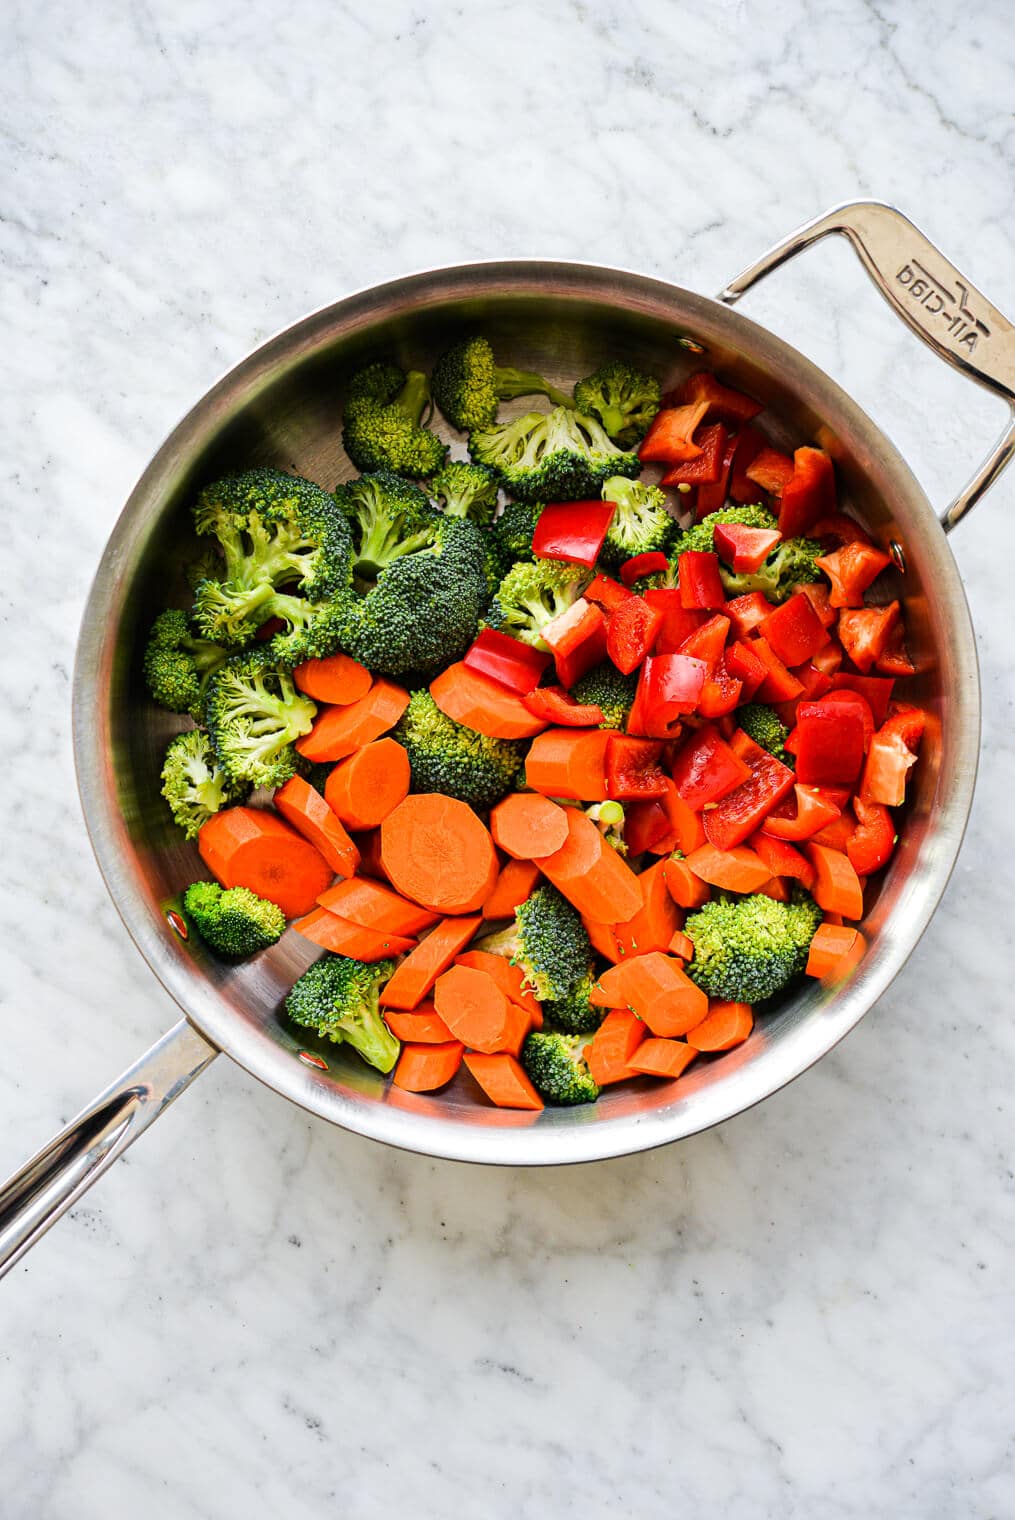 the veggies for chicken stir fry in a large stainless steel skillet